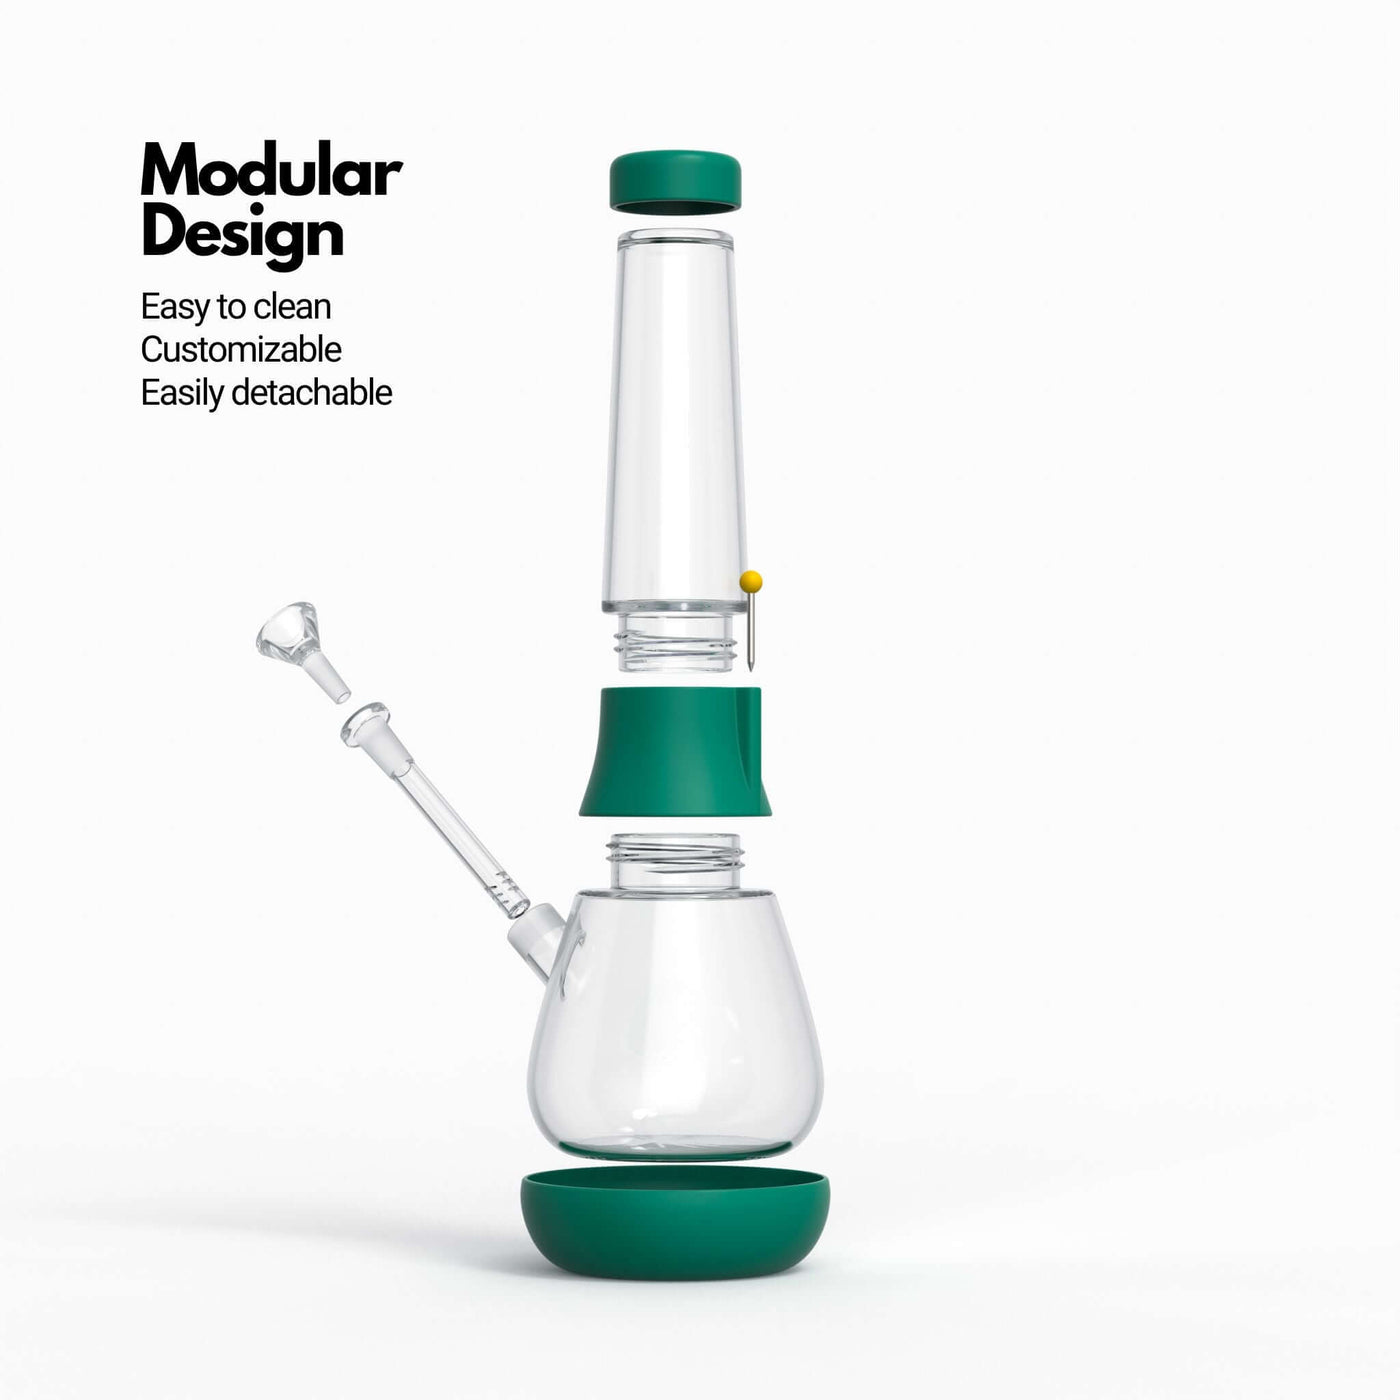 Exploded view infographic of Weeday modular bong (in forest green color), highlighting its customizable and detachable features.